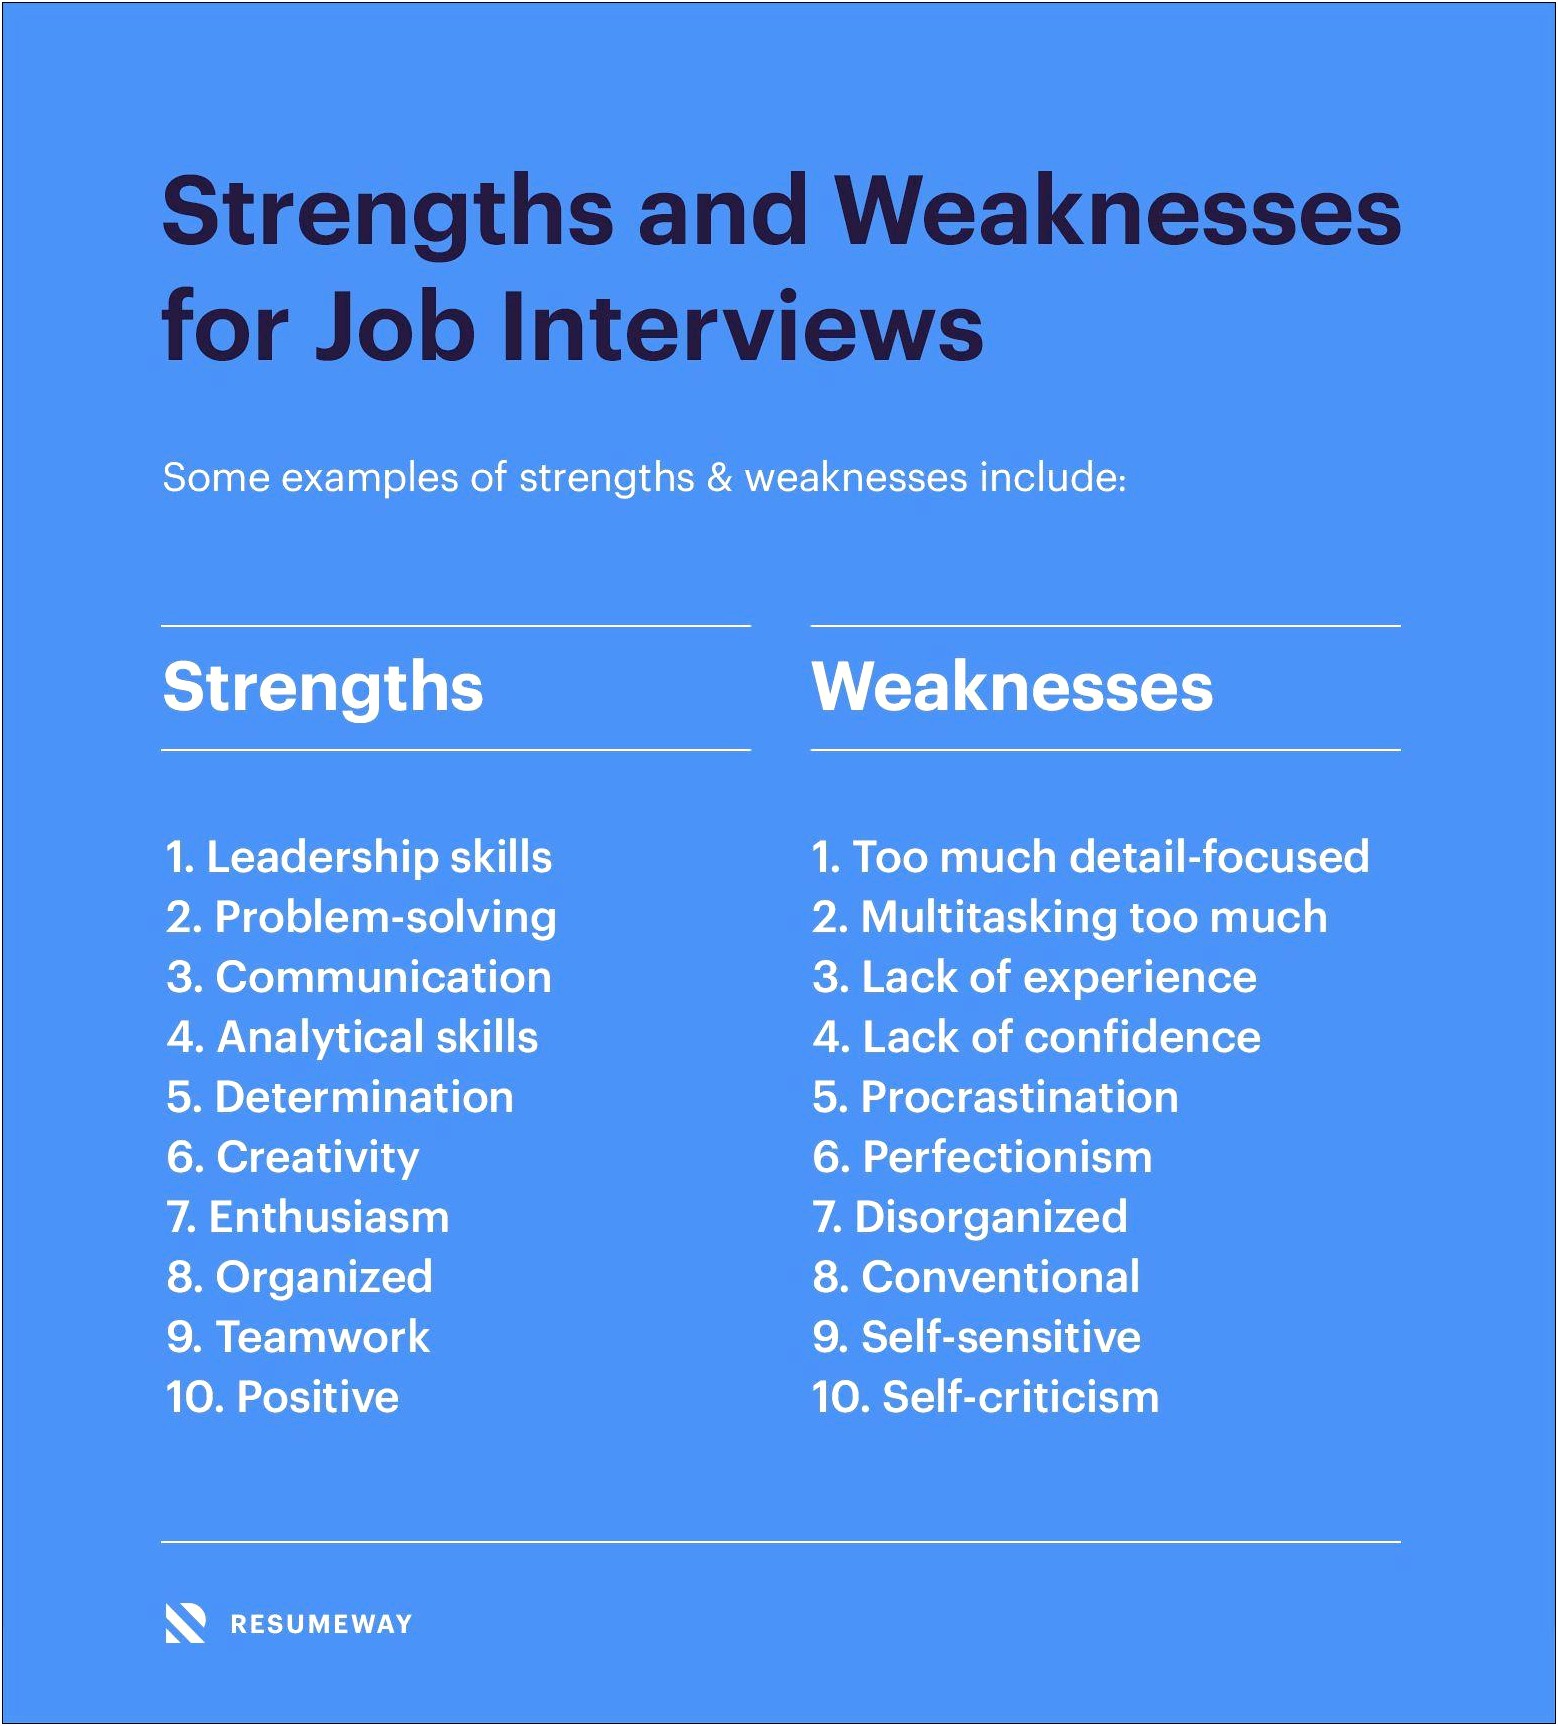 Strengths That Look Good On A Resume